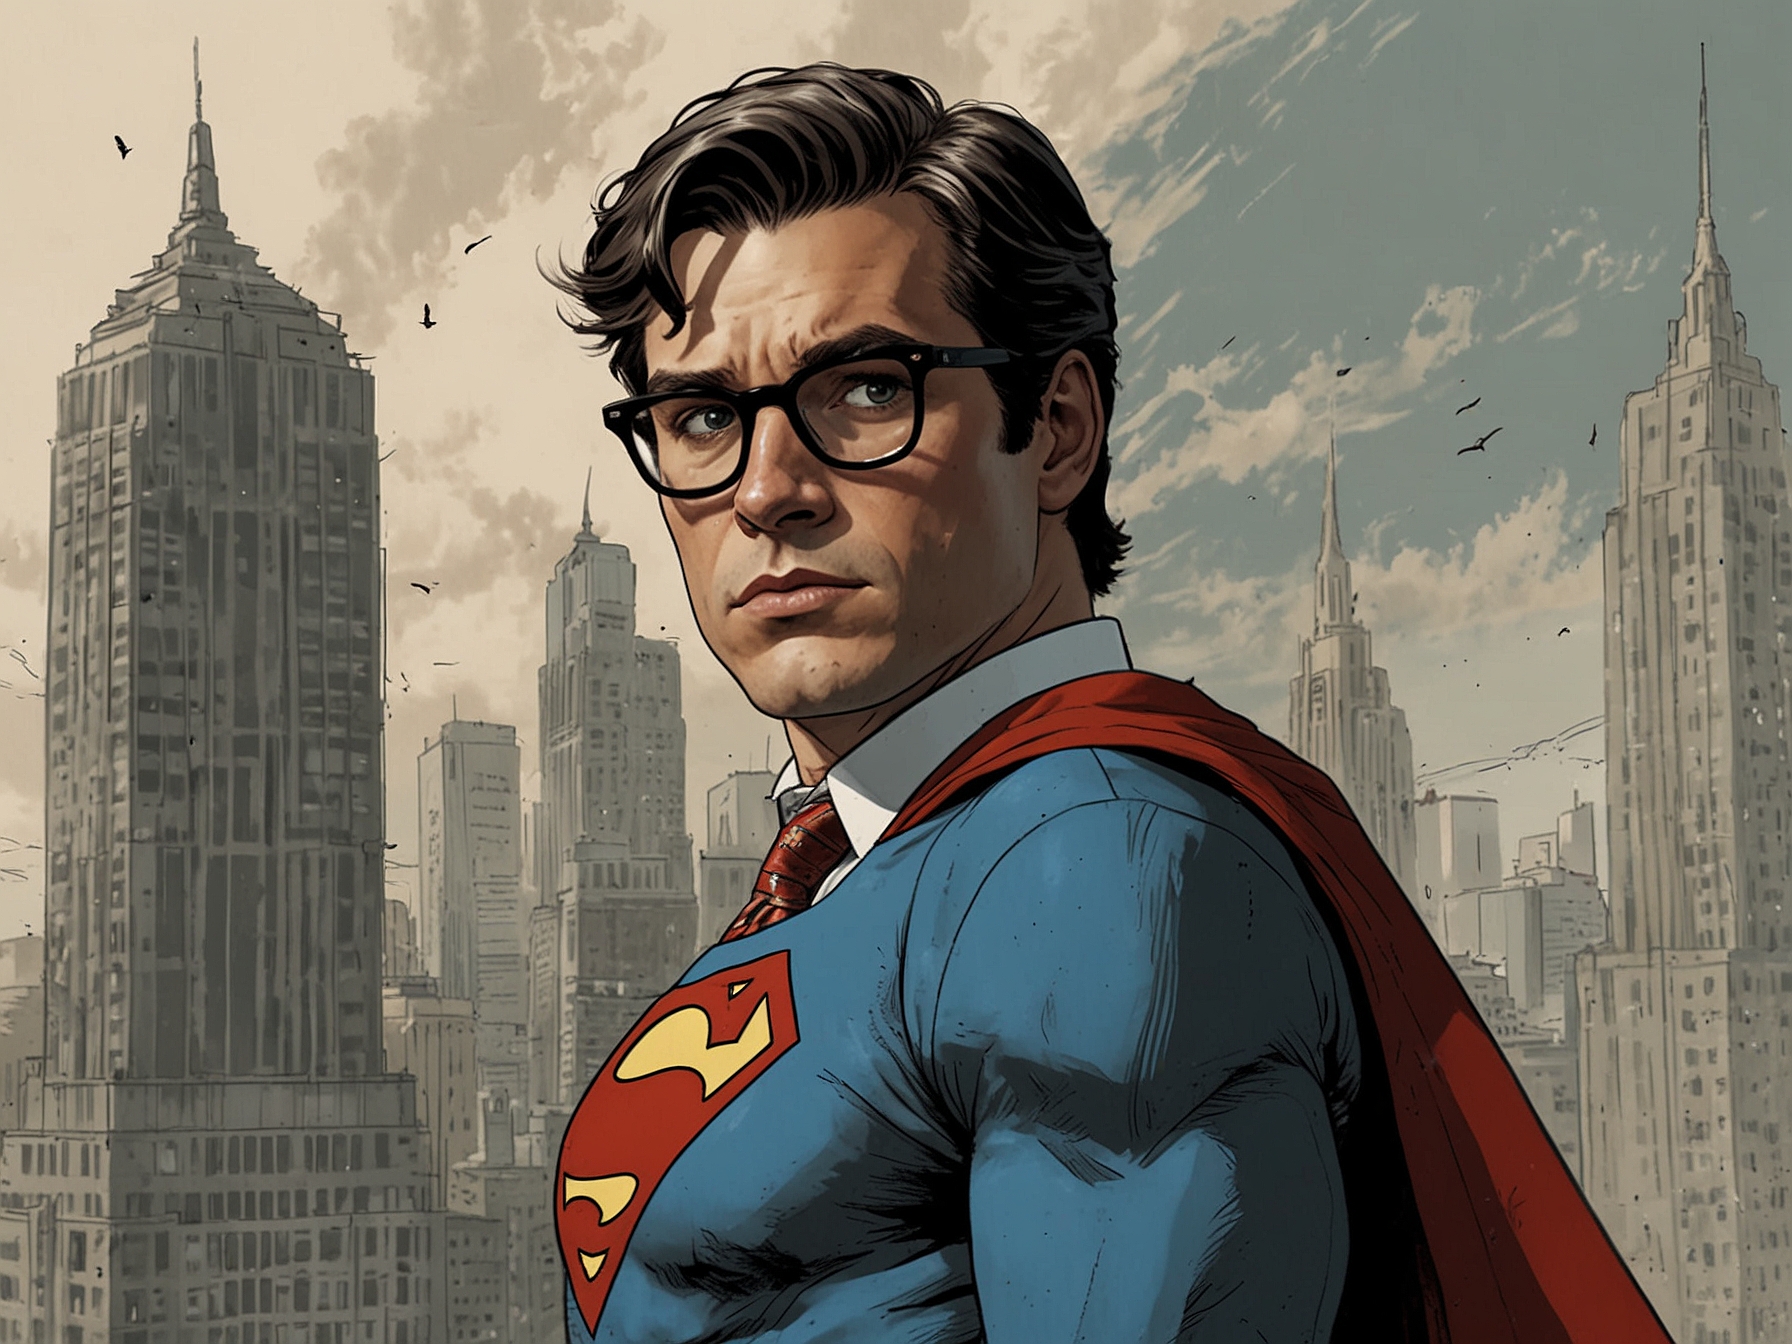 Clark Kent in 'My Adventures With Superman', sporting his iconic suit and cape, flying high above Metropolis while reflecting on his dual identity as a hero and everyday journalist.